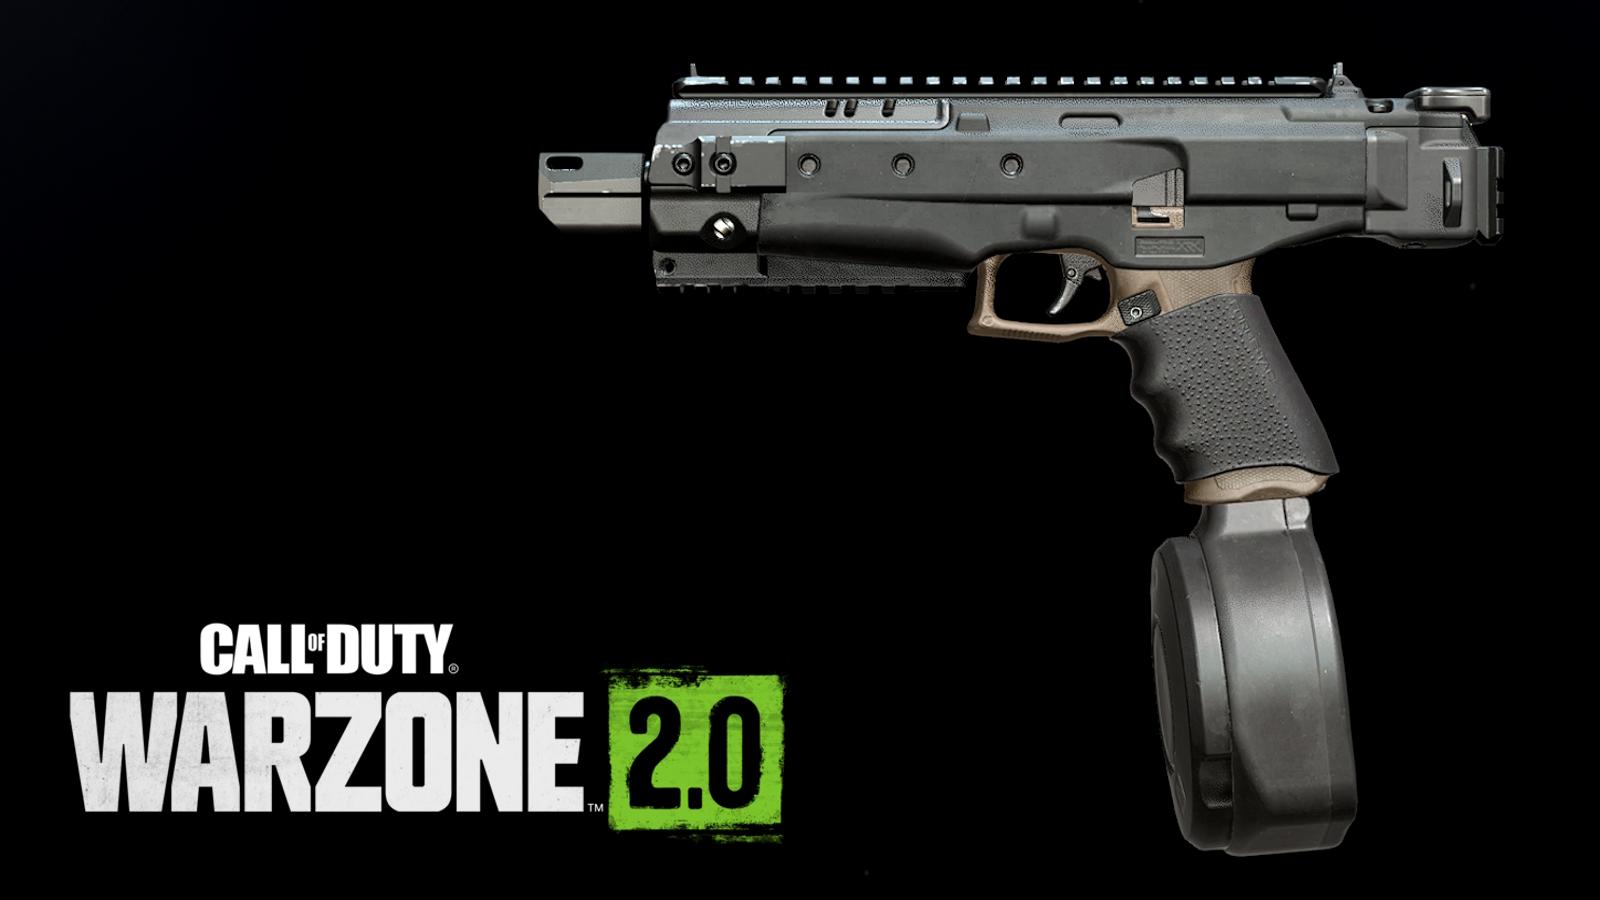 The X13 Auto pistol sidearm from Warzone 2 with logo in bottom left corner.